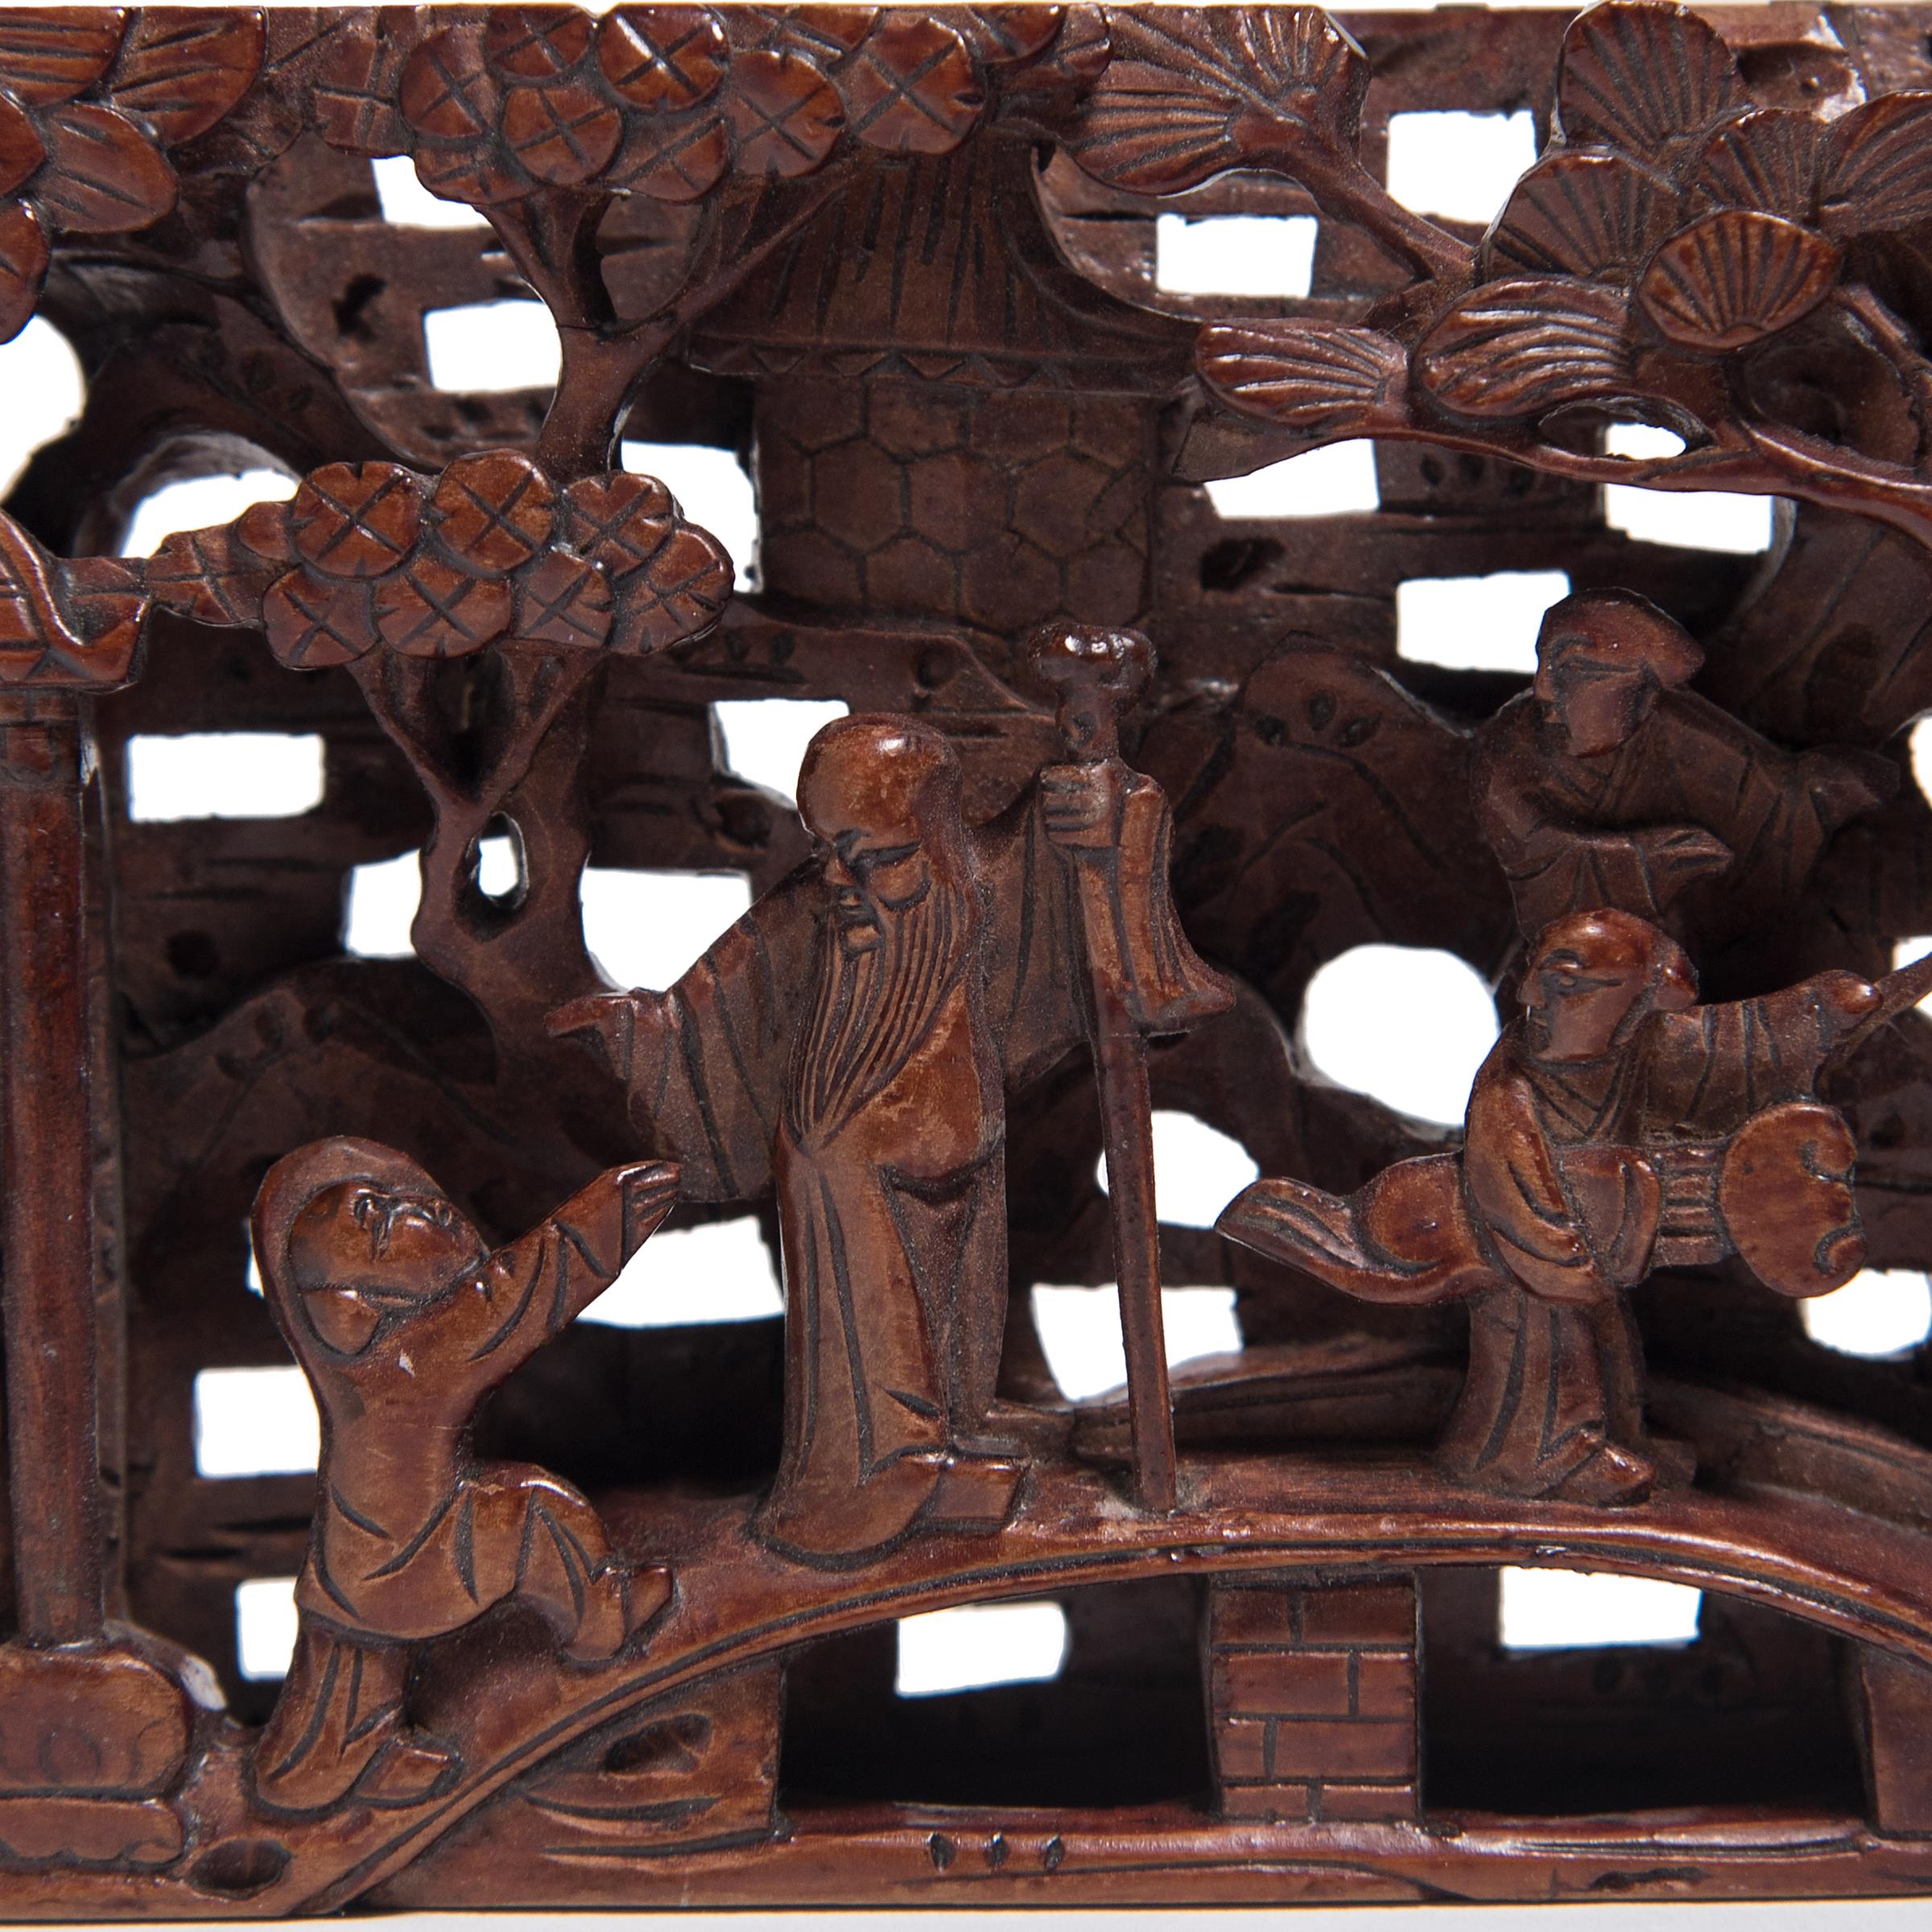 Densely carved with an energetic landscape, this pierced panel was originally inserted to the ornate frame of a 19th century canopy bed. Likely a scene from a Classic Chinese novel, the panel depicts robed officials surrounded by young